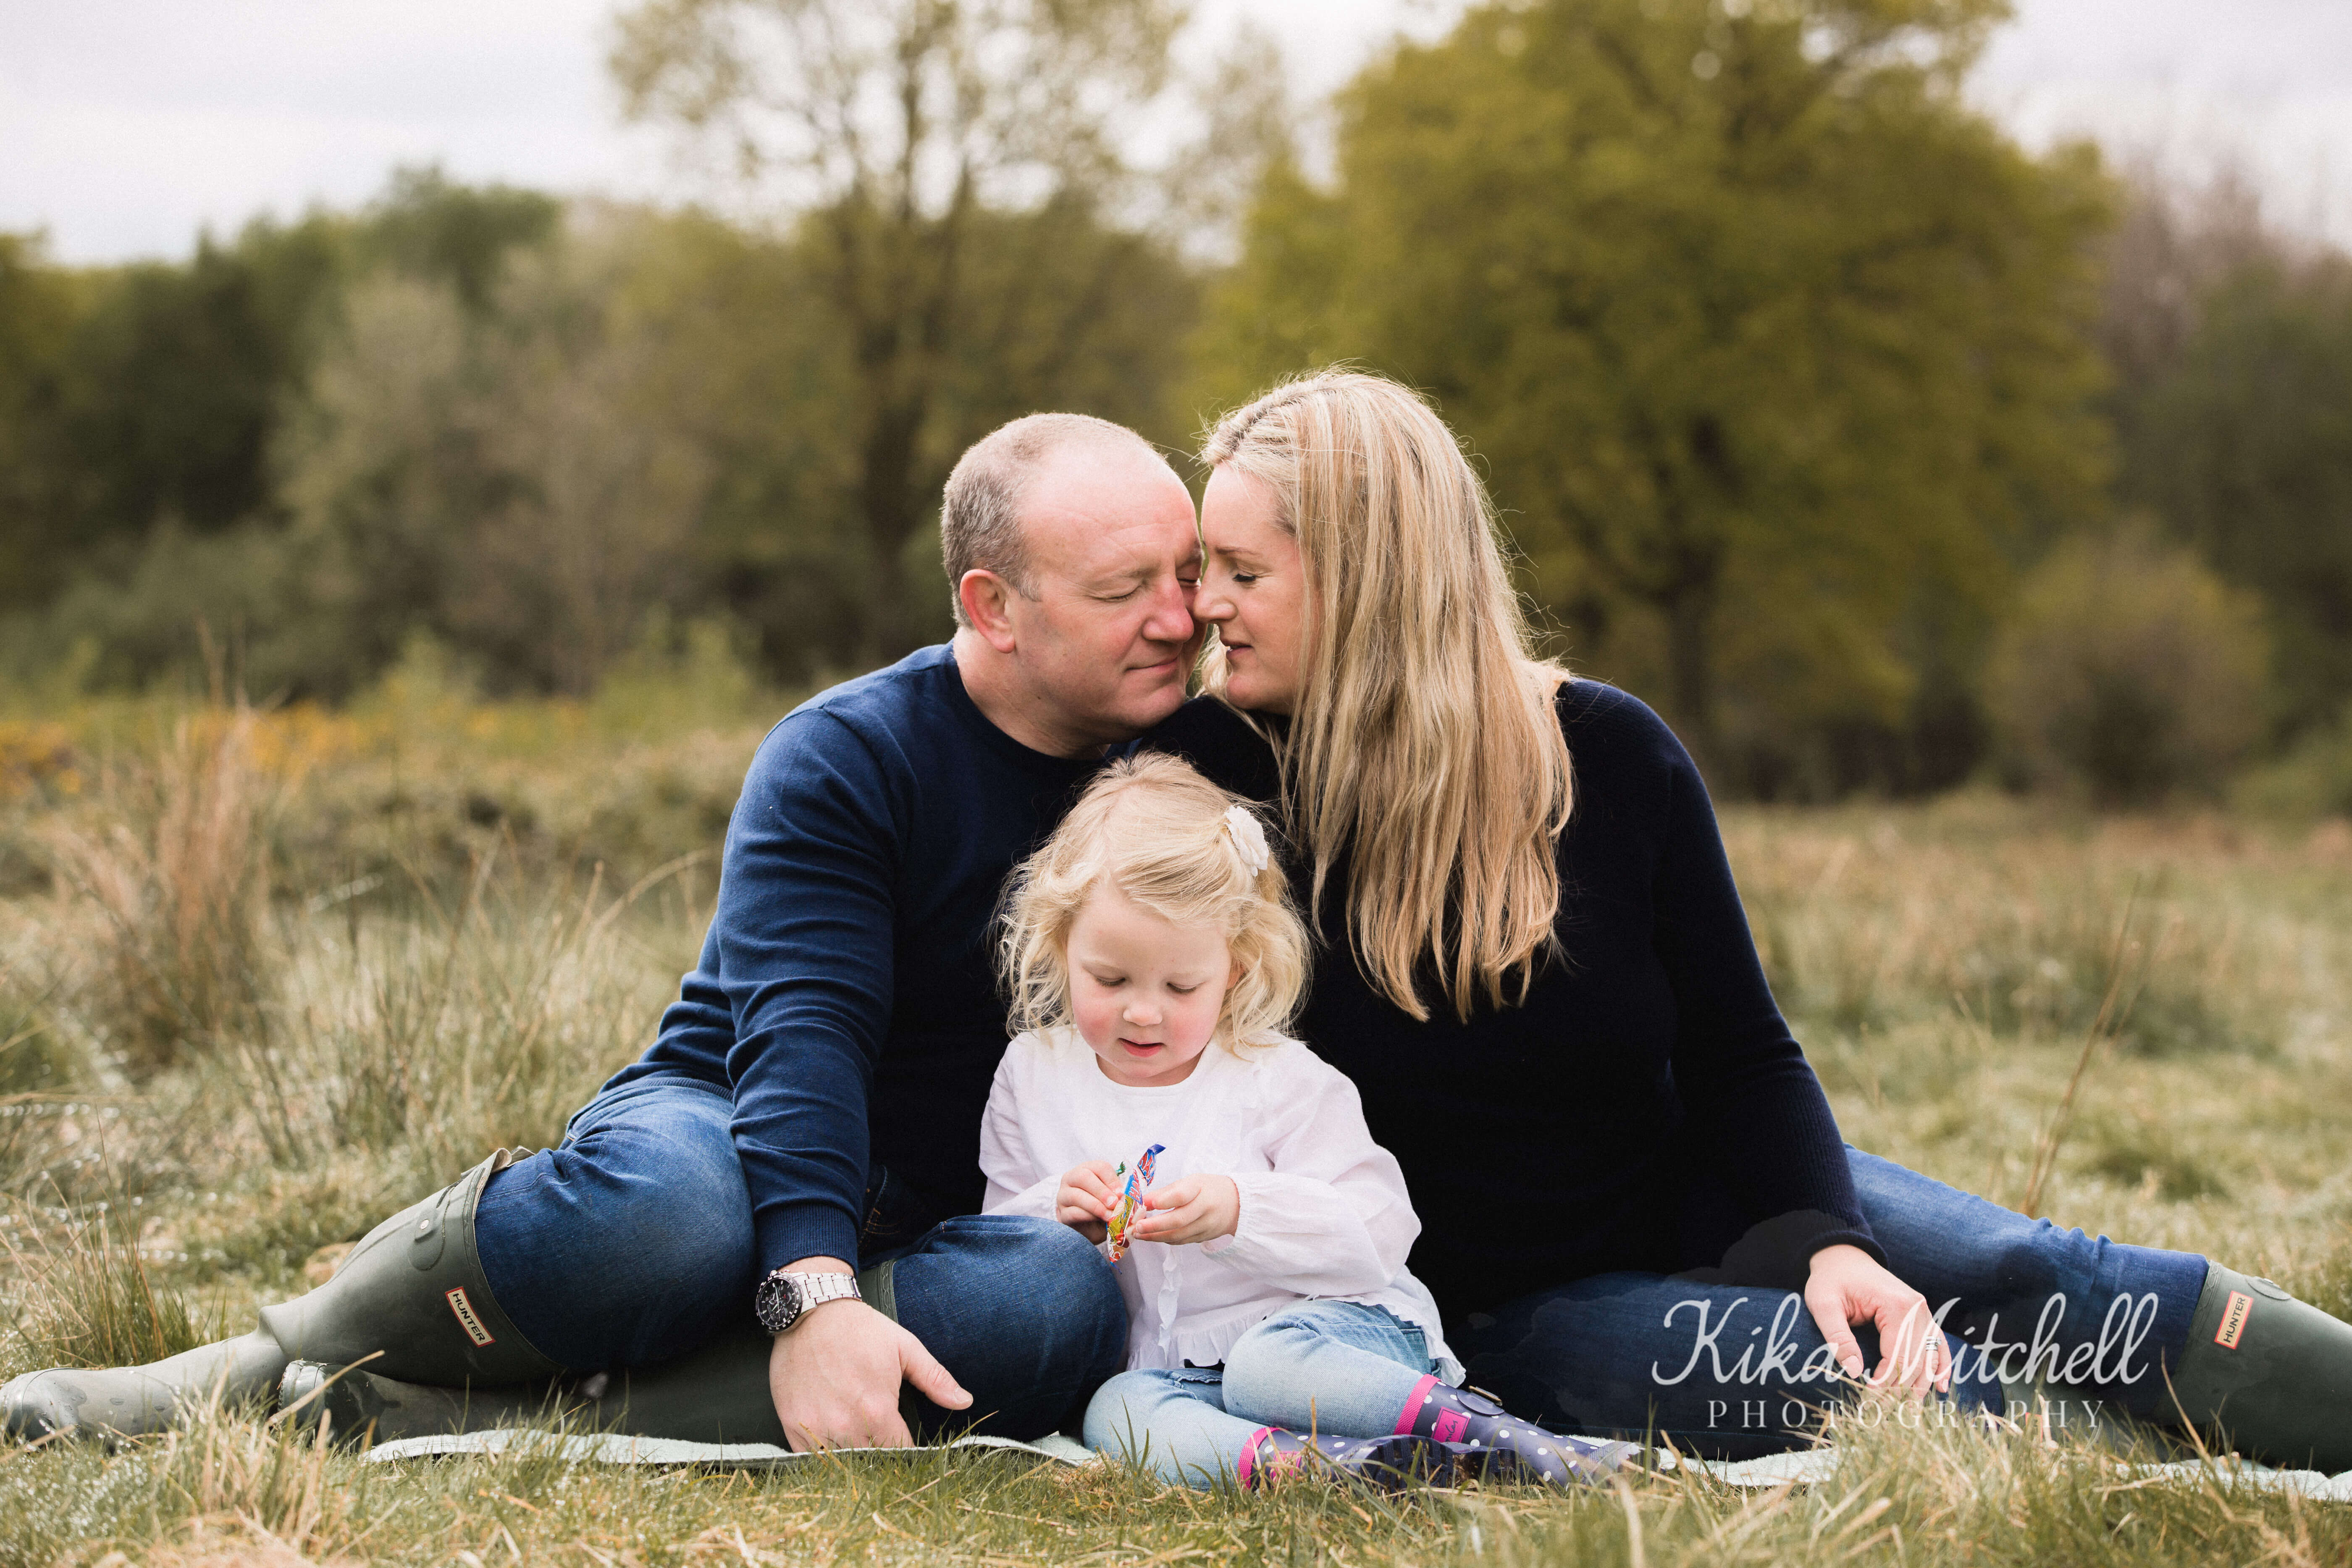 Spring family wardrobe ideas, what to wear for your family photoshoot with Kika Mitchell Photography